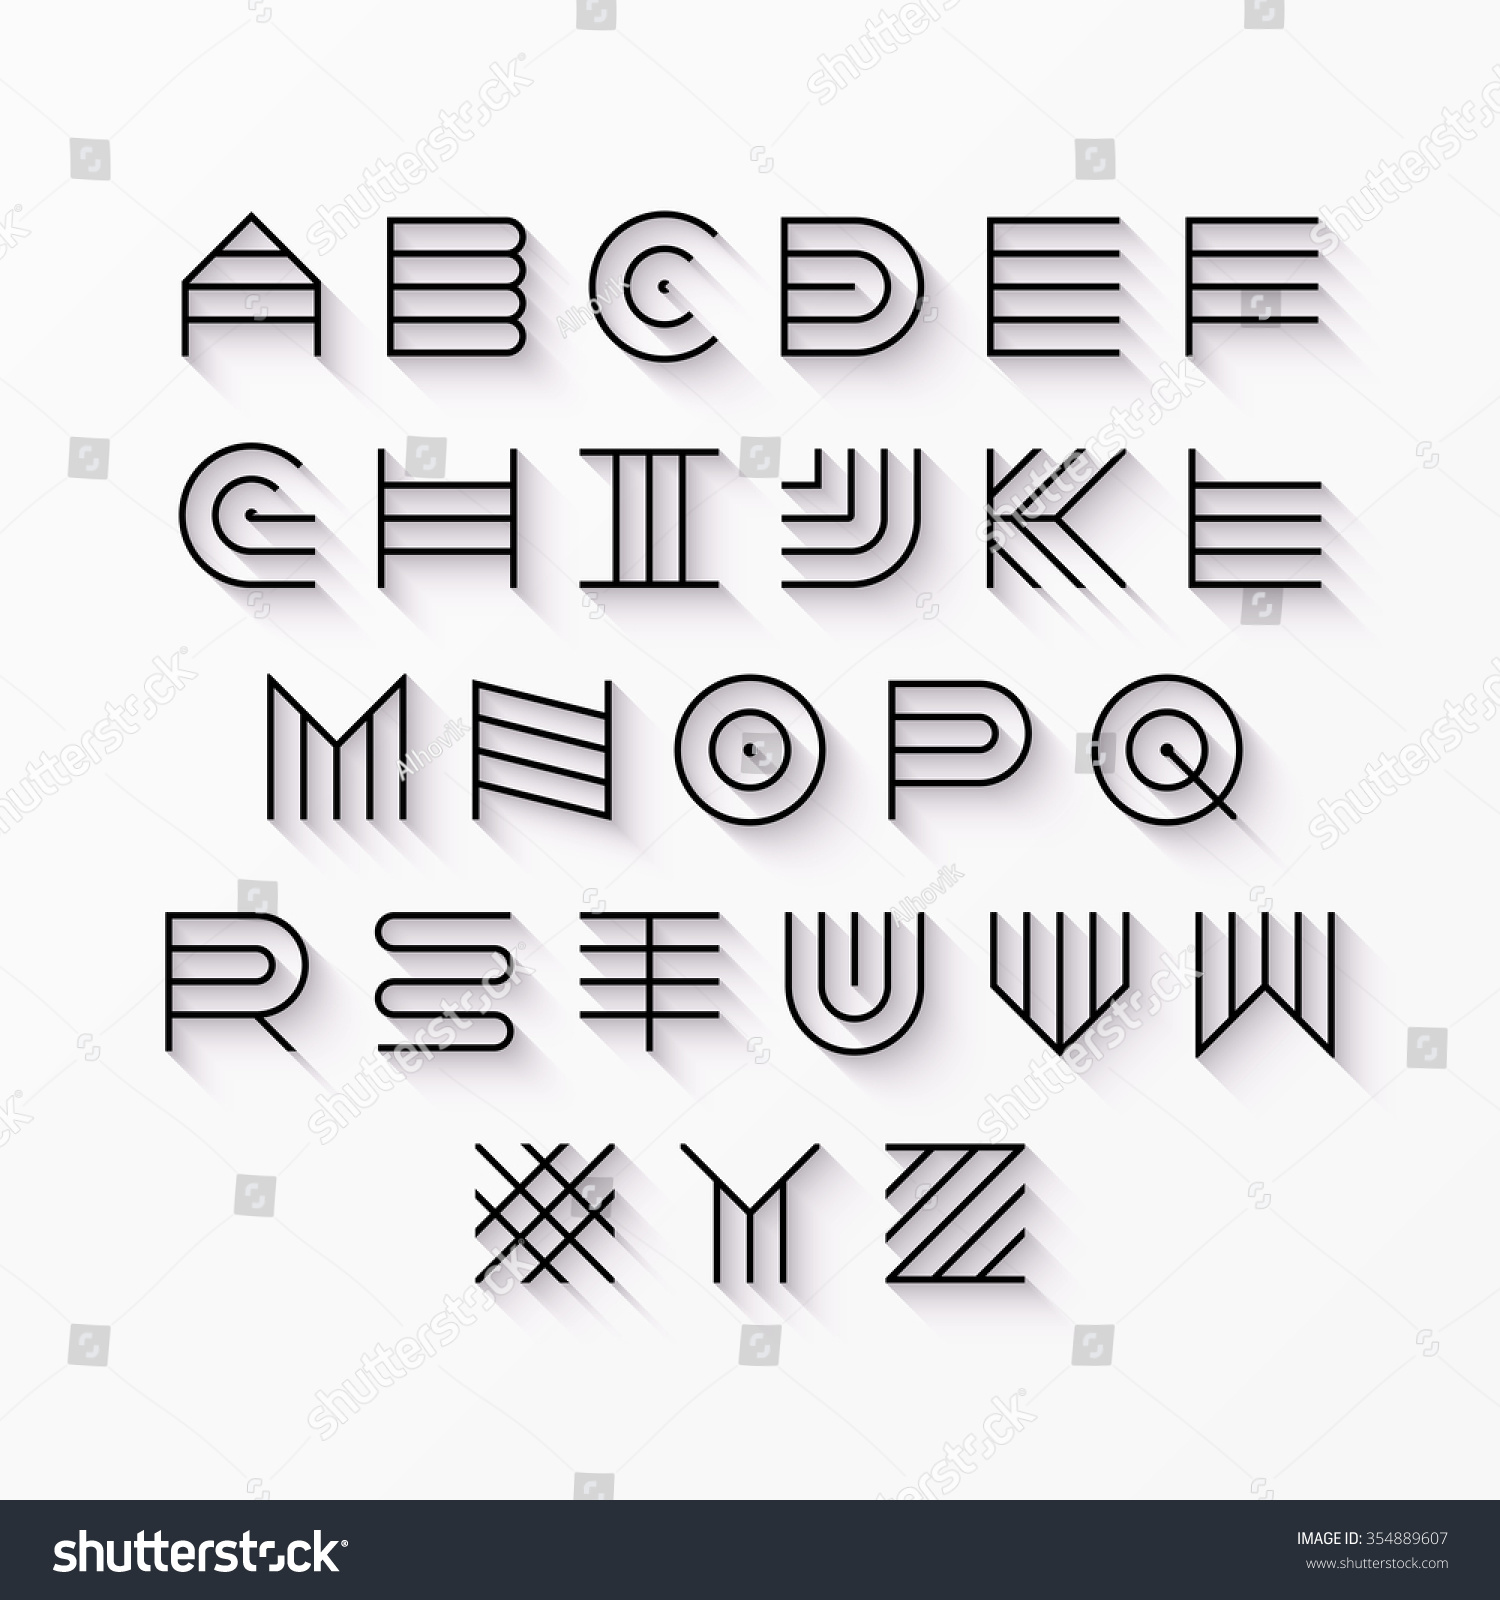 stock-vector-thin-line-style-linear-uppercase-modern-font-typeface-latin-alphabet-with-shadow-effect-vector-354889607.jpg